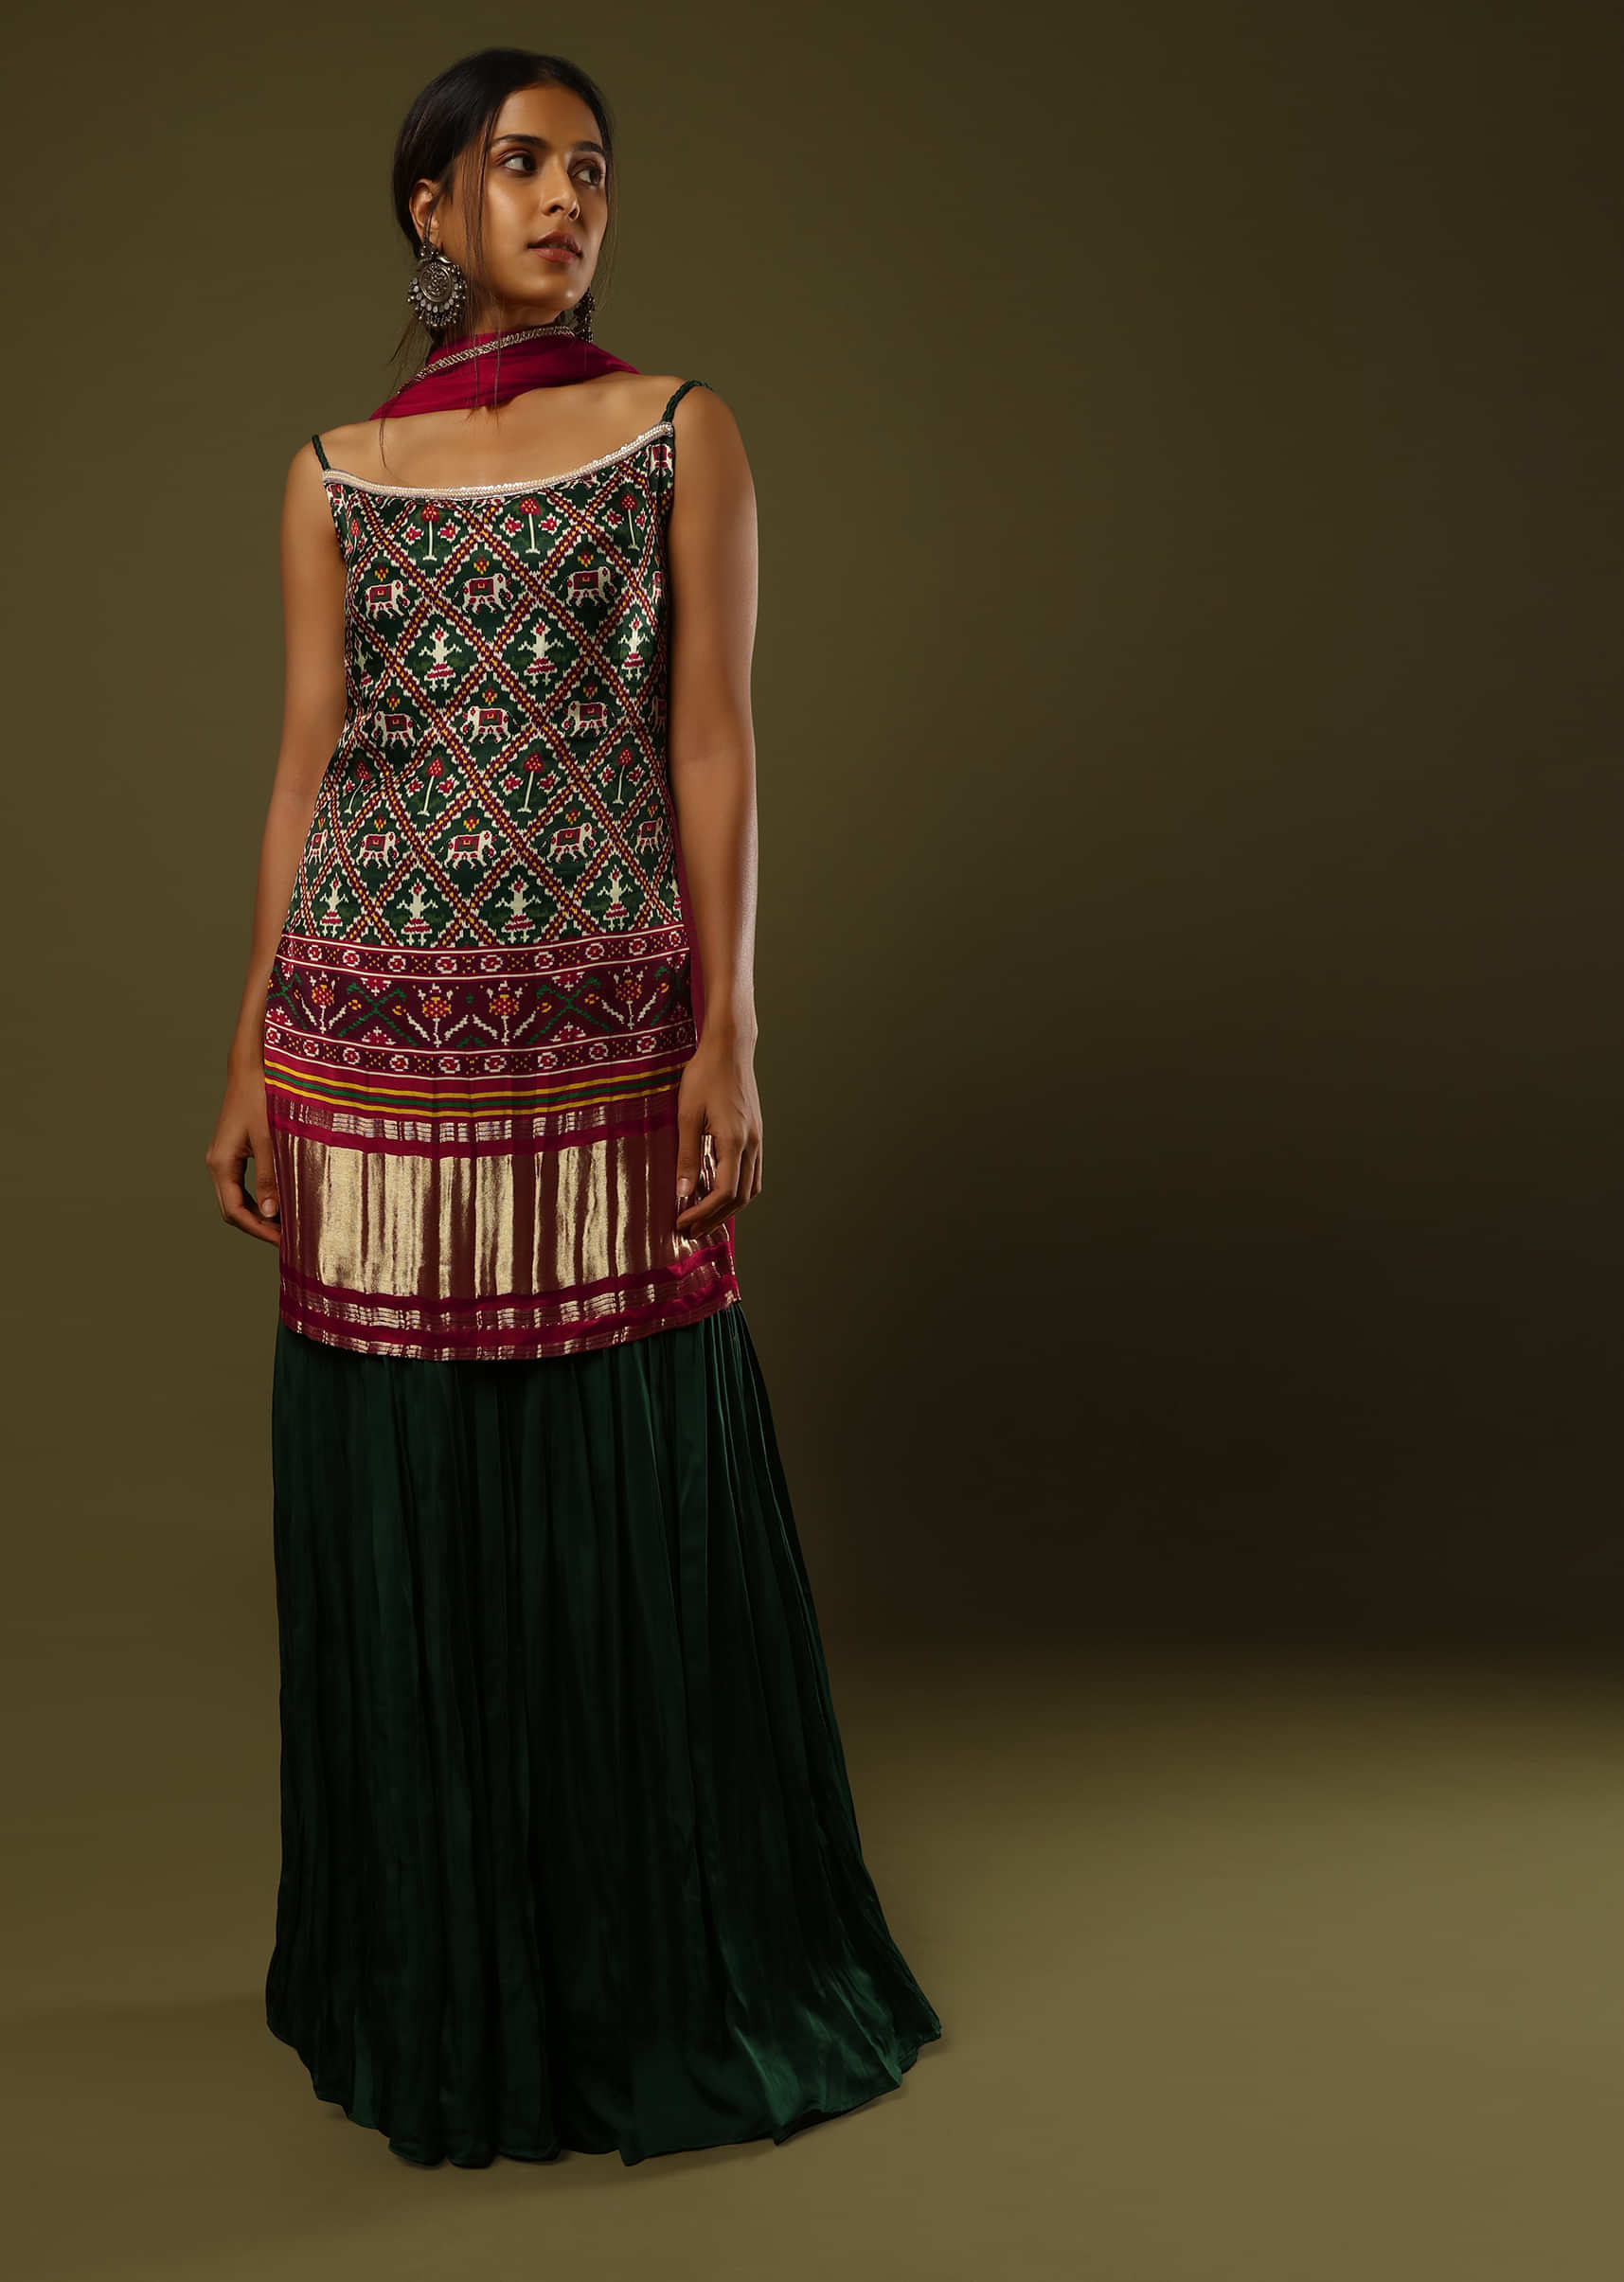 Forest Green Sharara Suit In Satin Blend With Patola Print And Brocade Border  